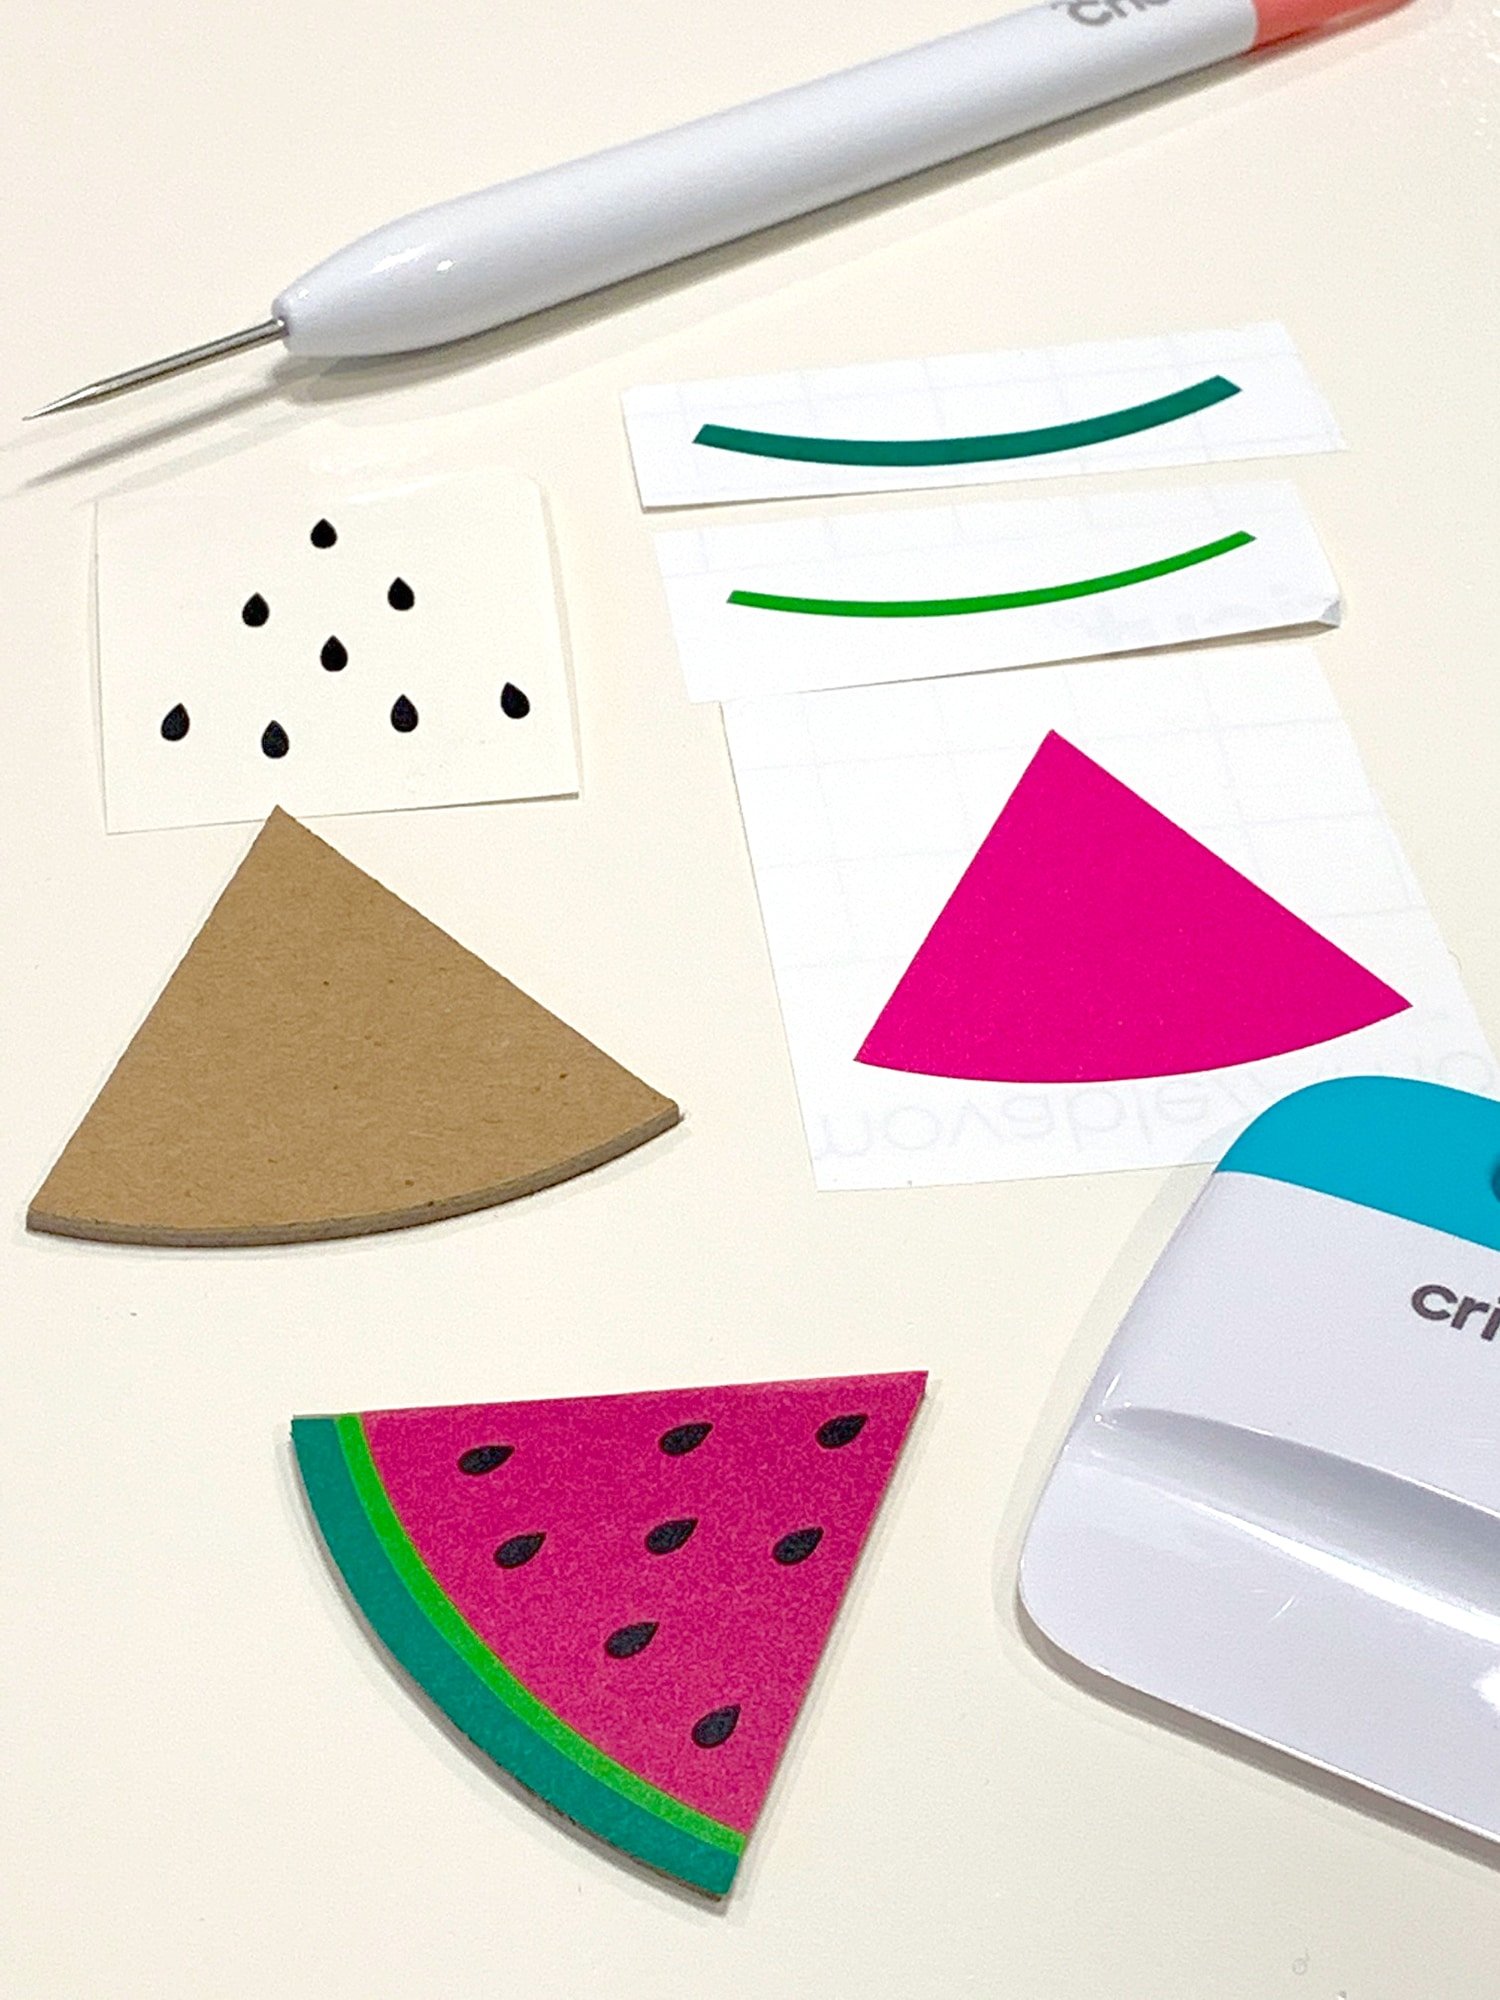 pieces for making the watermelon slice earrings with cricut